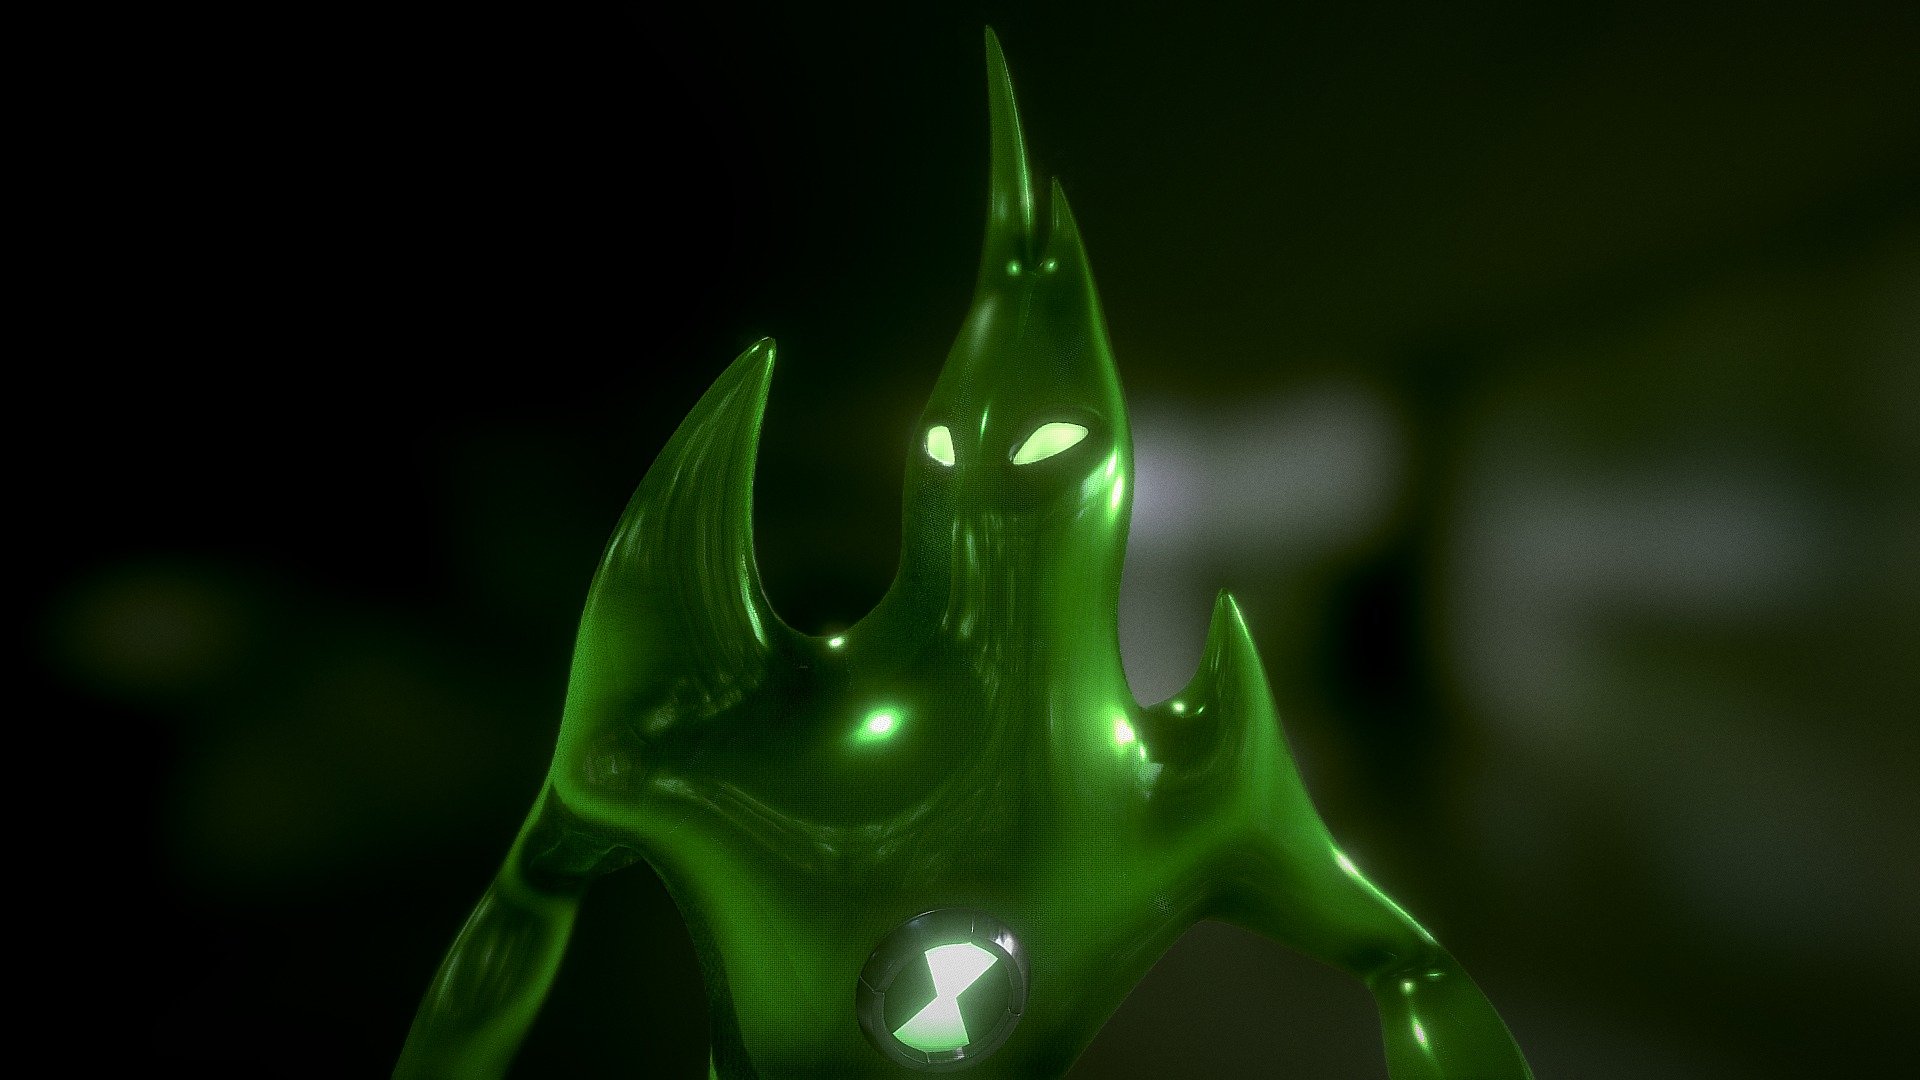 Remember when BEN 10 was a thing? em a grown man

here's a random recent model of Goop from Ben 10 Alien Force. Gotta be honest, he's pretty fun to model (I might do more of these types of models)

Credit(s)
Model and render by me (ScouT2Illustrates/YellowFox Gamer)
Ben 10 franchise by Man of Action &amp; Cartoon Network - BEN10 - Some Goop model - 3D model by ScouT2Illustrates 3d model